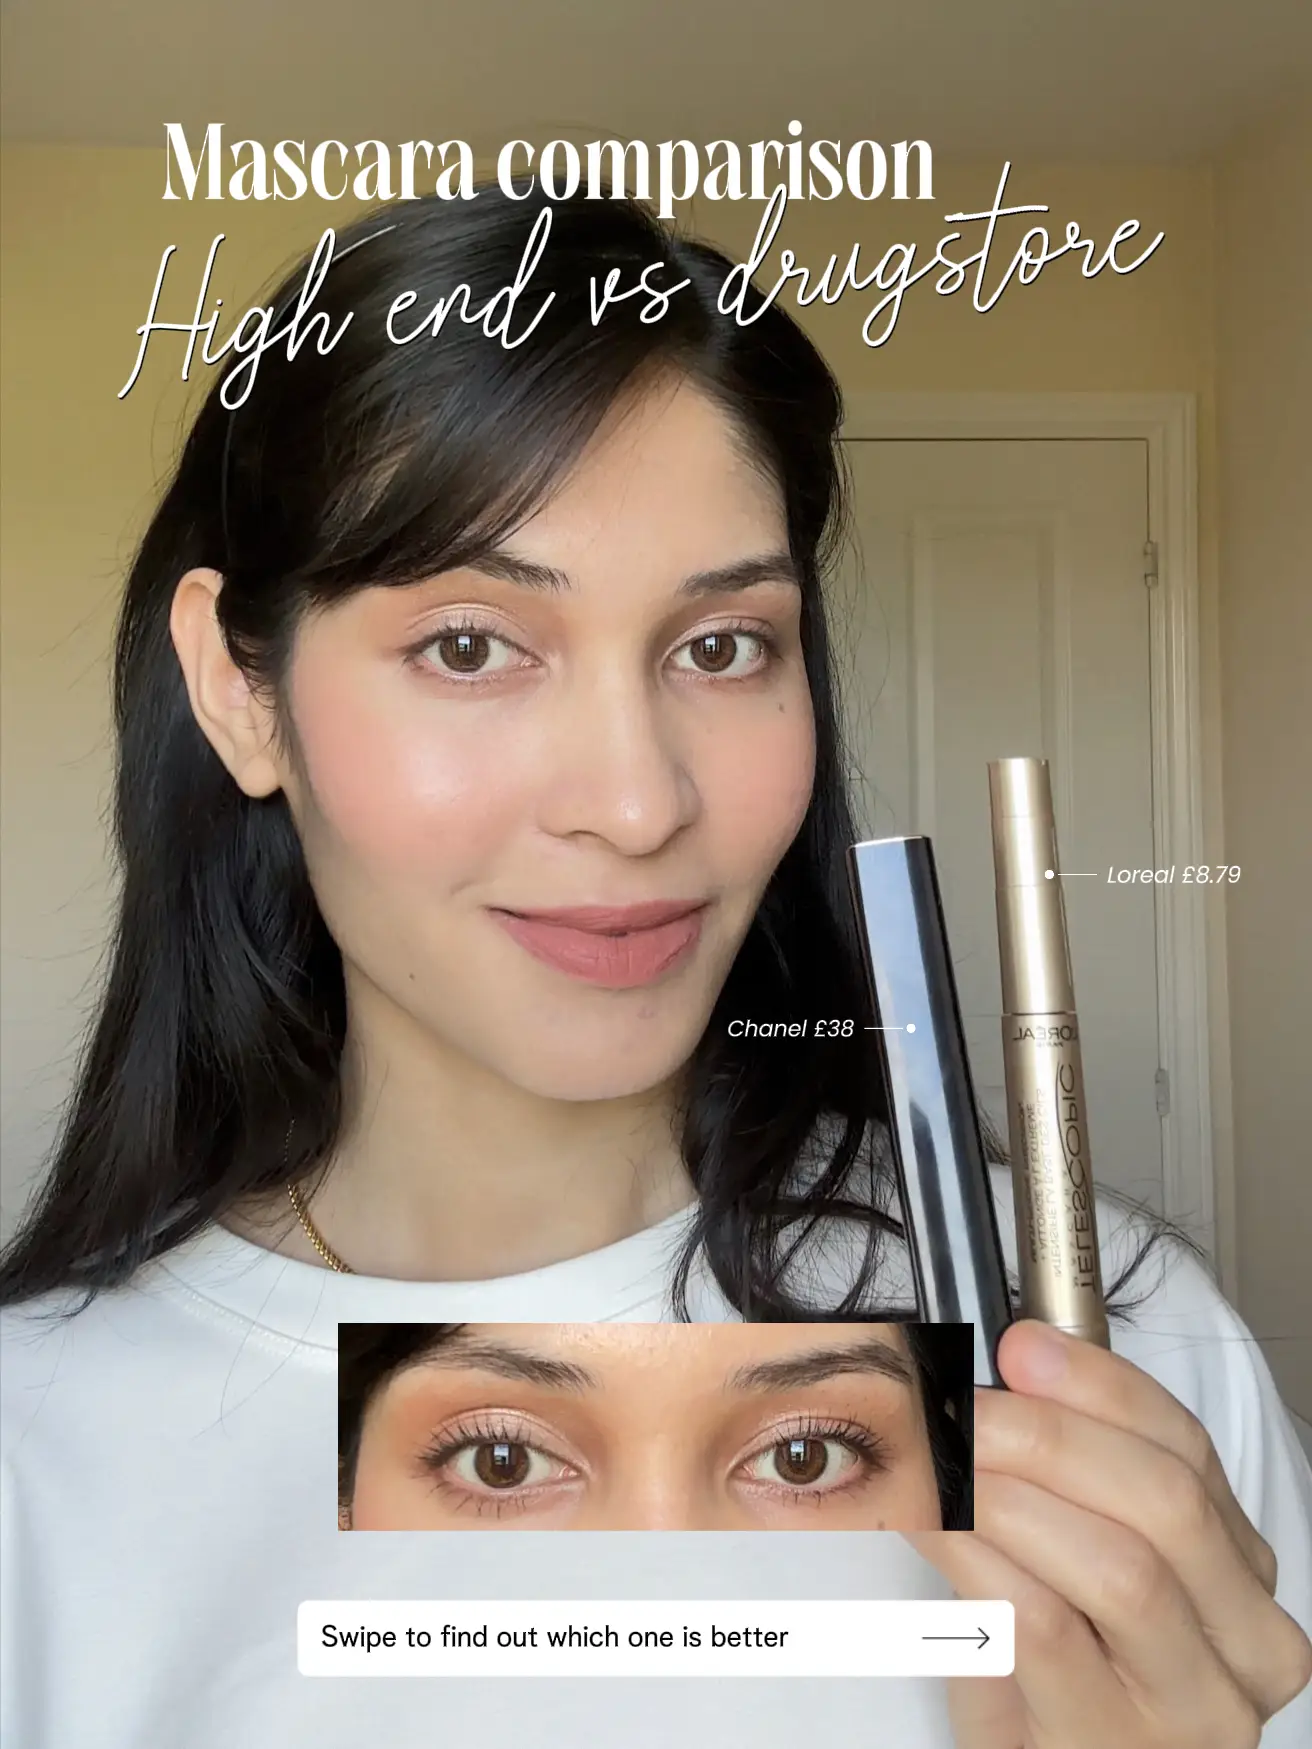 HIGH END VS DRUGSTORE: MASCARA COMPARISON, Gallery posted by Syahirah